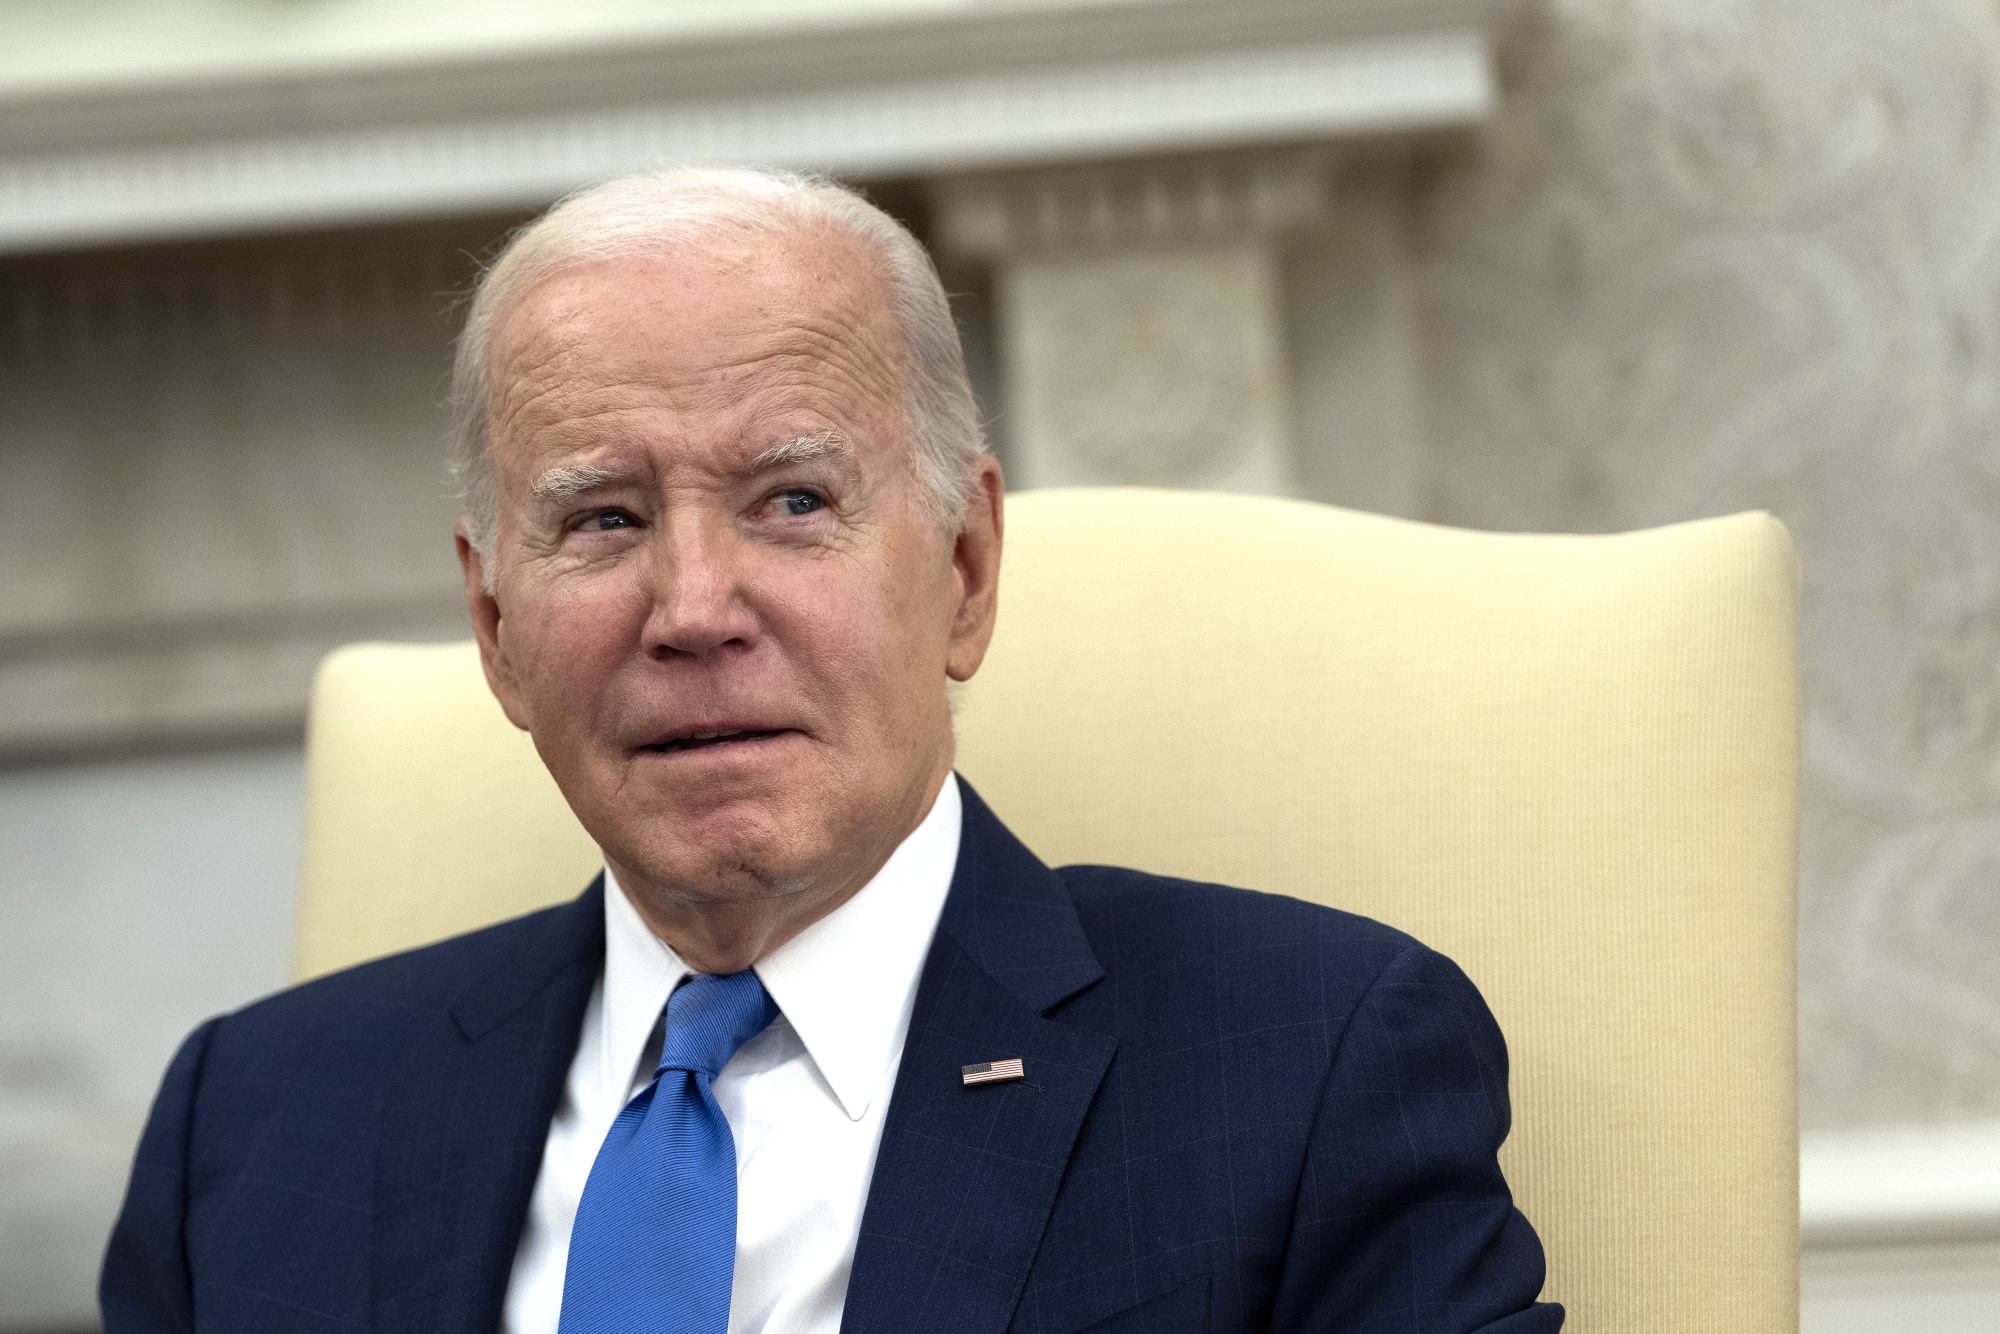 Biden Faces Challenge in Gaining Support from Haley Voters